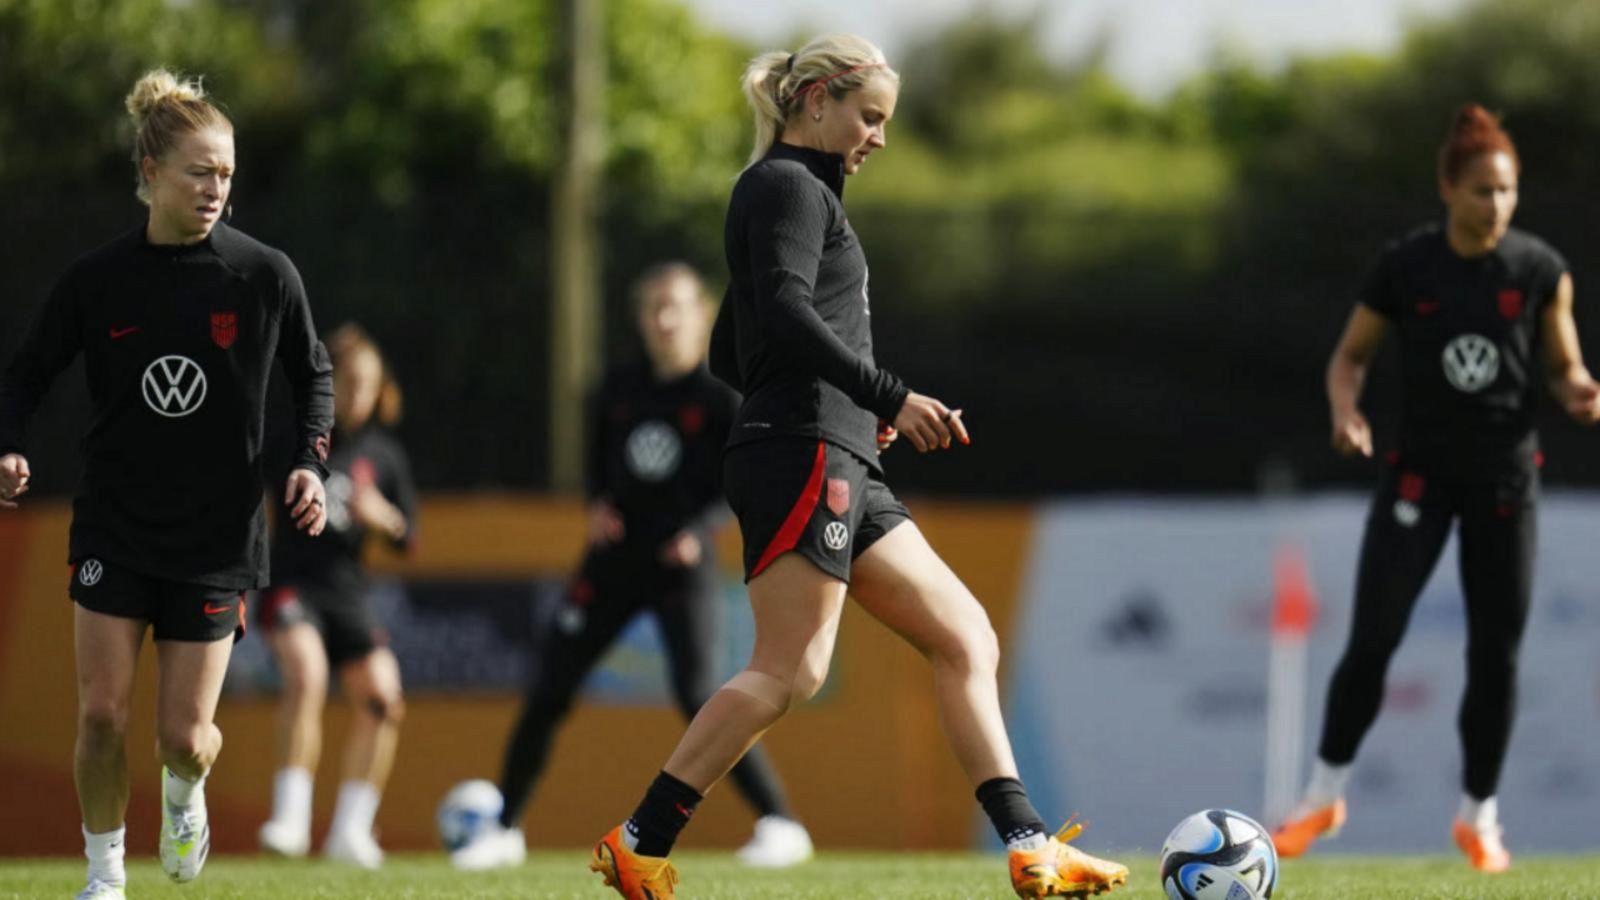 VIDEO: US women's soccer team prepares to take on Portugal in World Cup